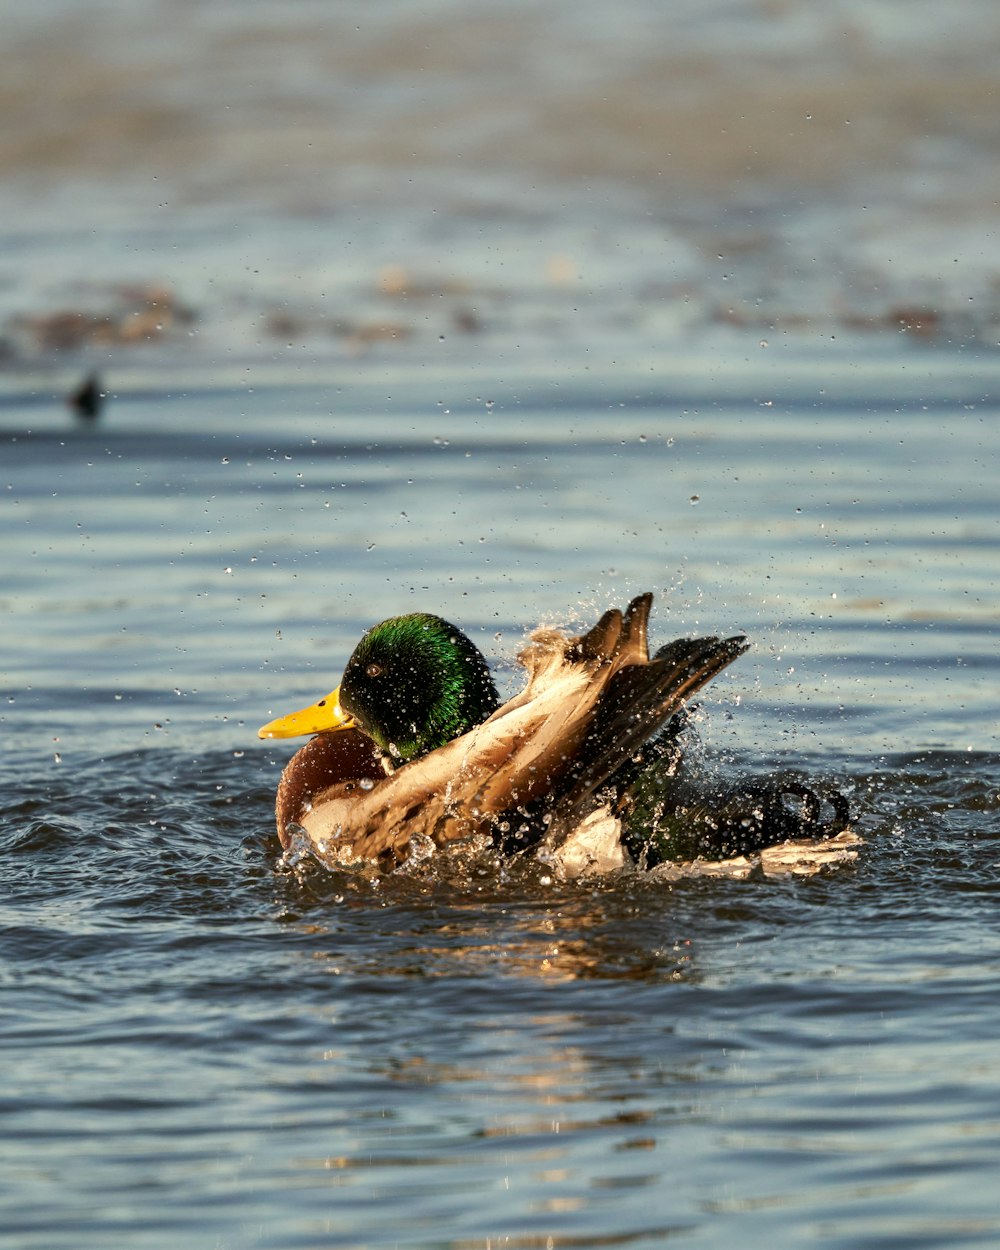 a couple of ducks swimming on top of a body of water